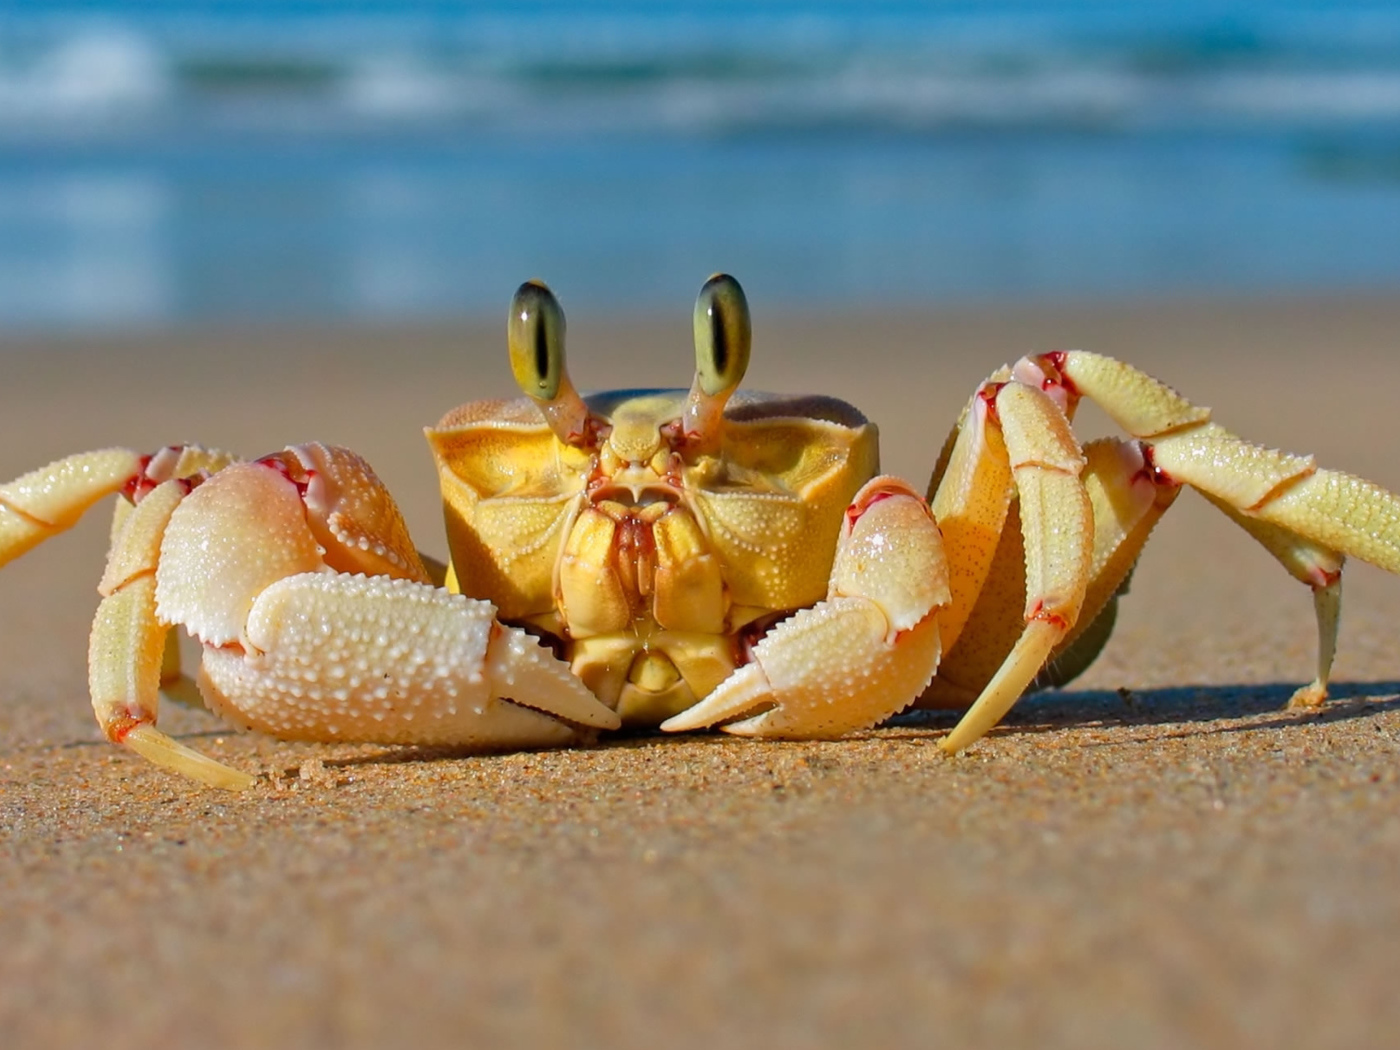 Big crab crawling in the sand